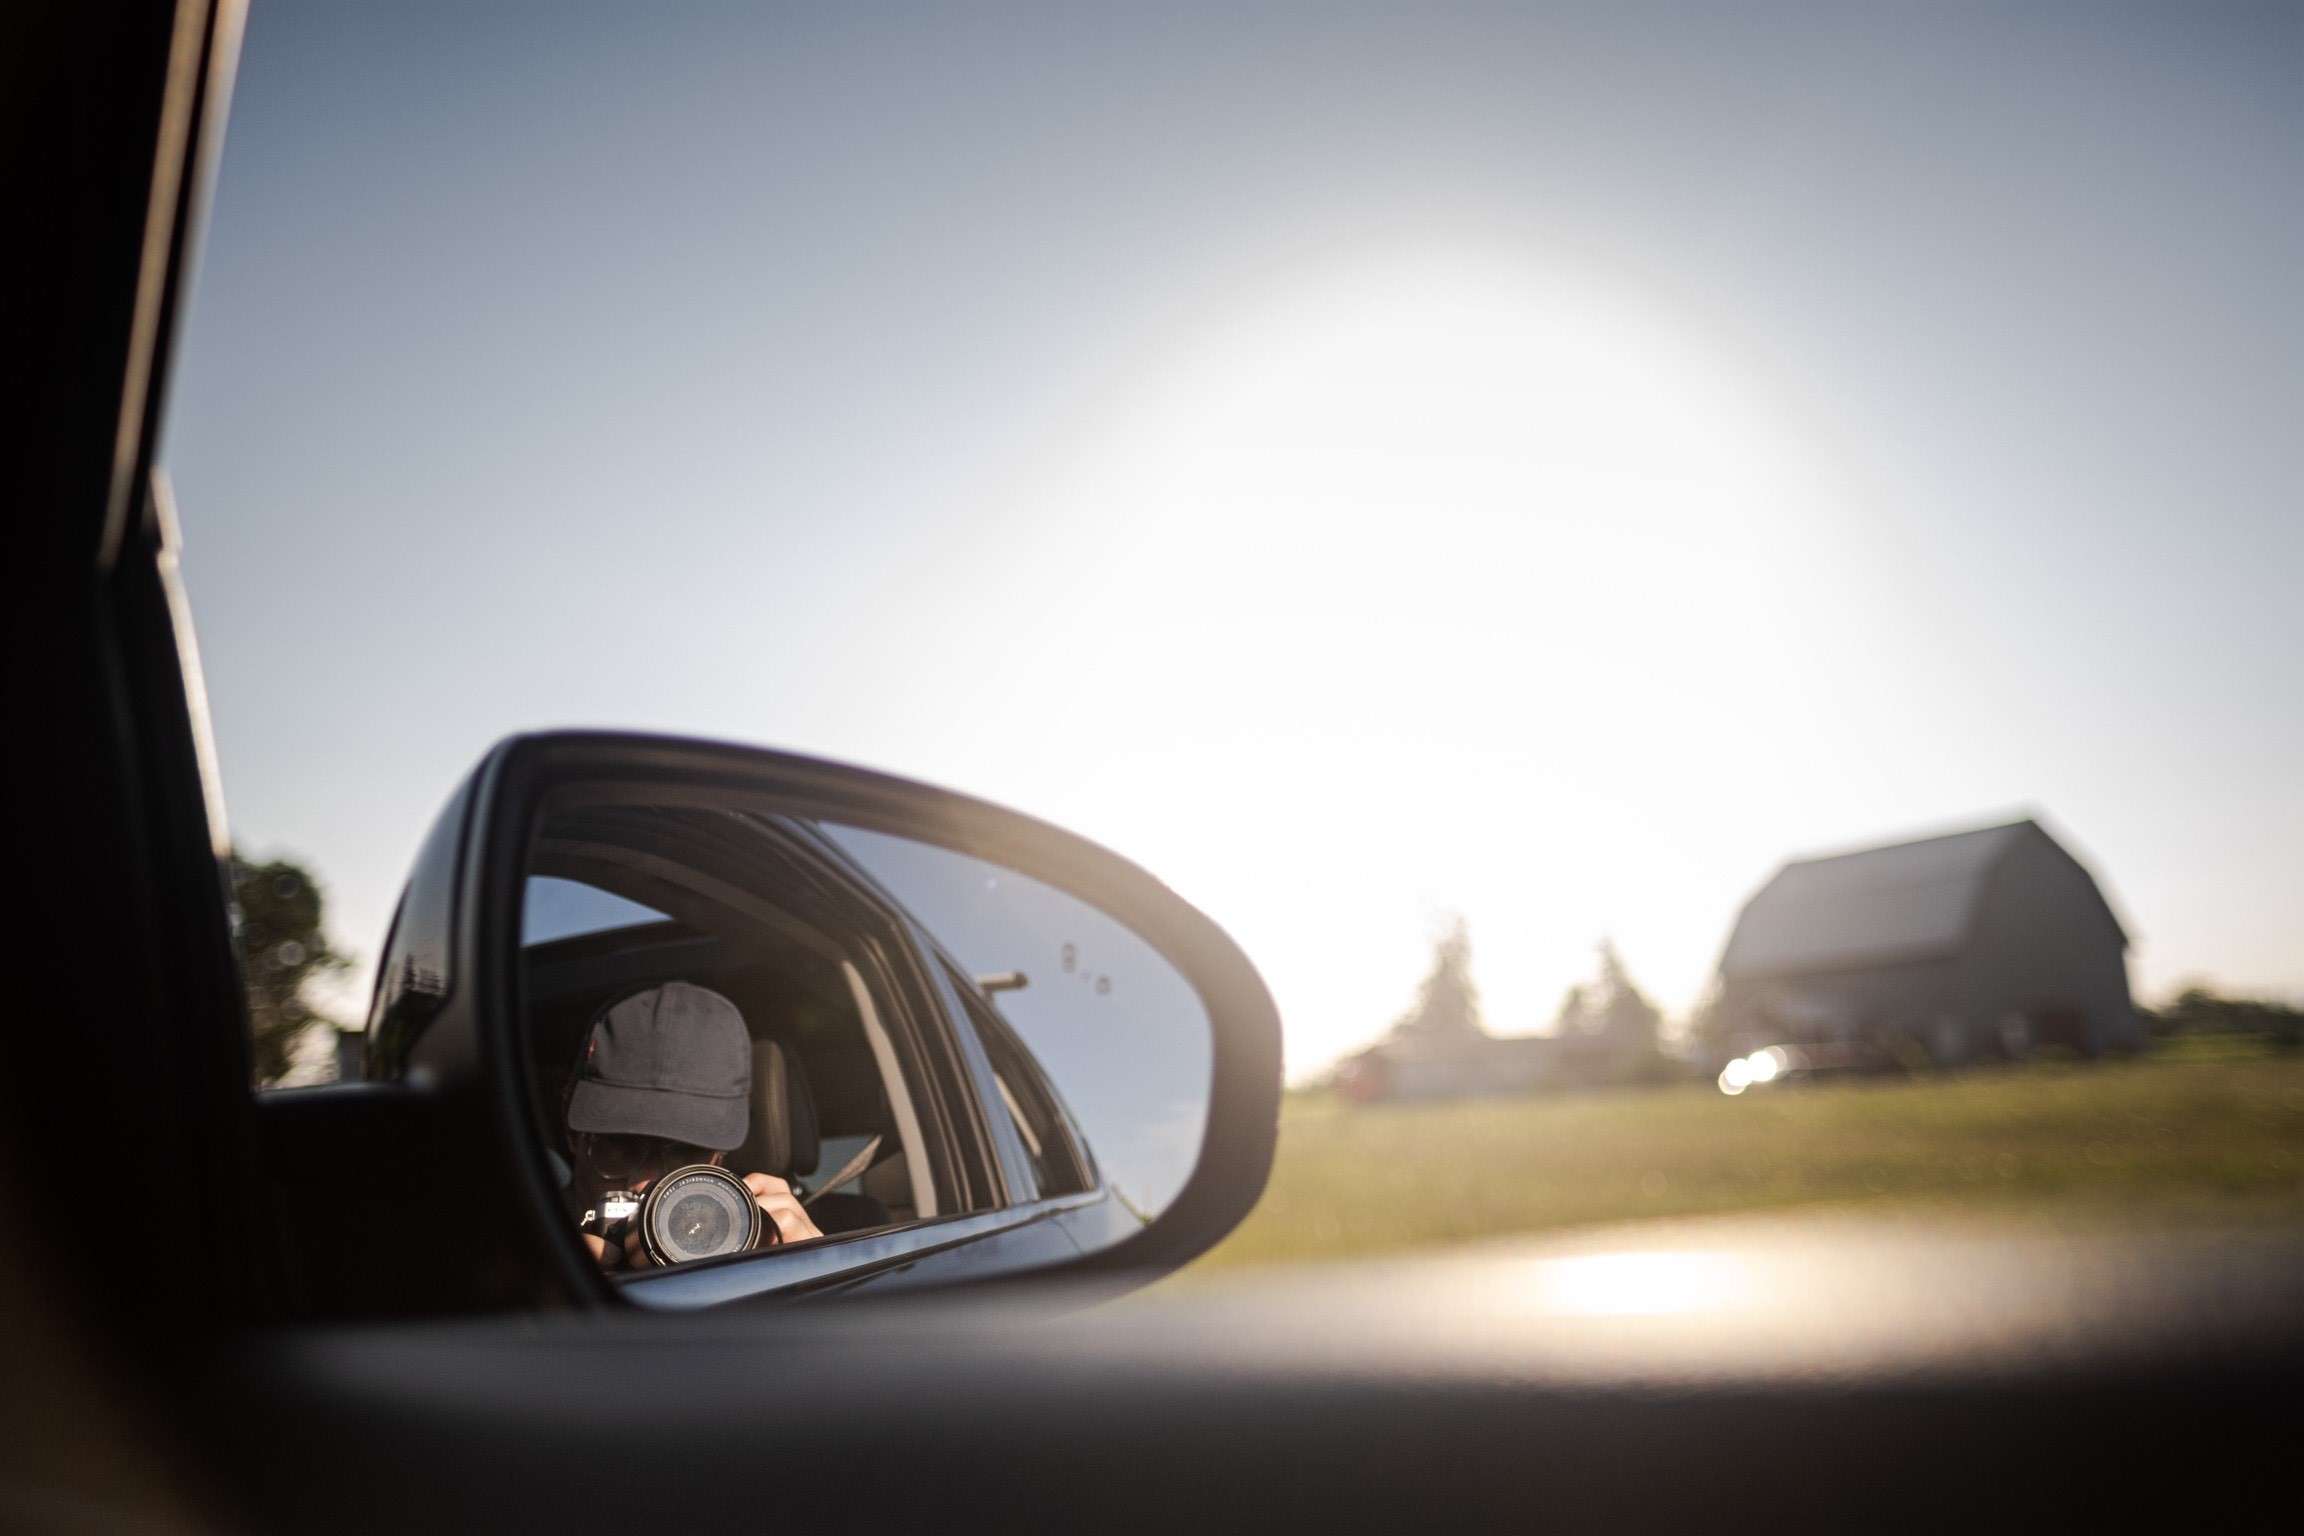 Tyler Colburne takes a picture of his reflection in a car side mirror with the sun in the background.